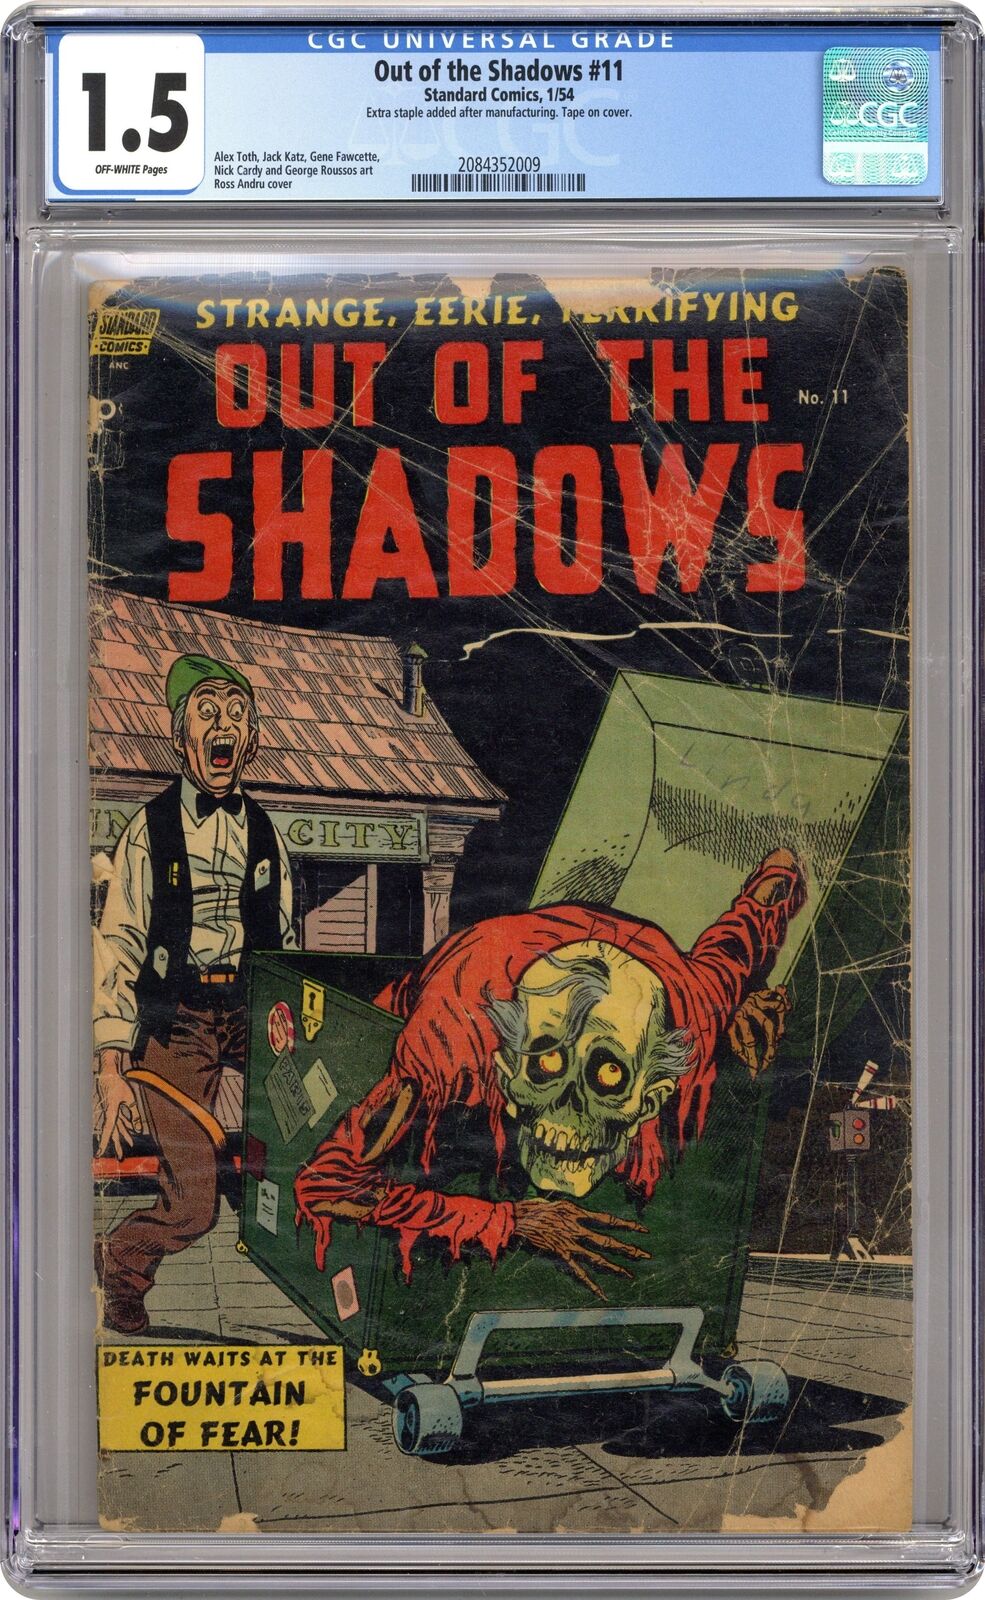 Out of the Shadows #11 CGC 1.5 1954 2084352009